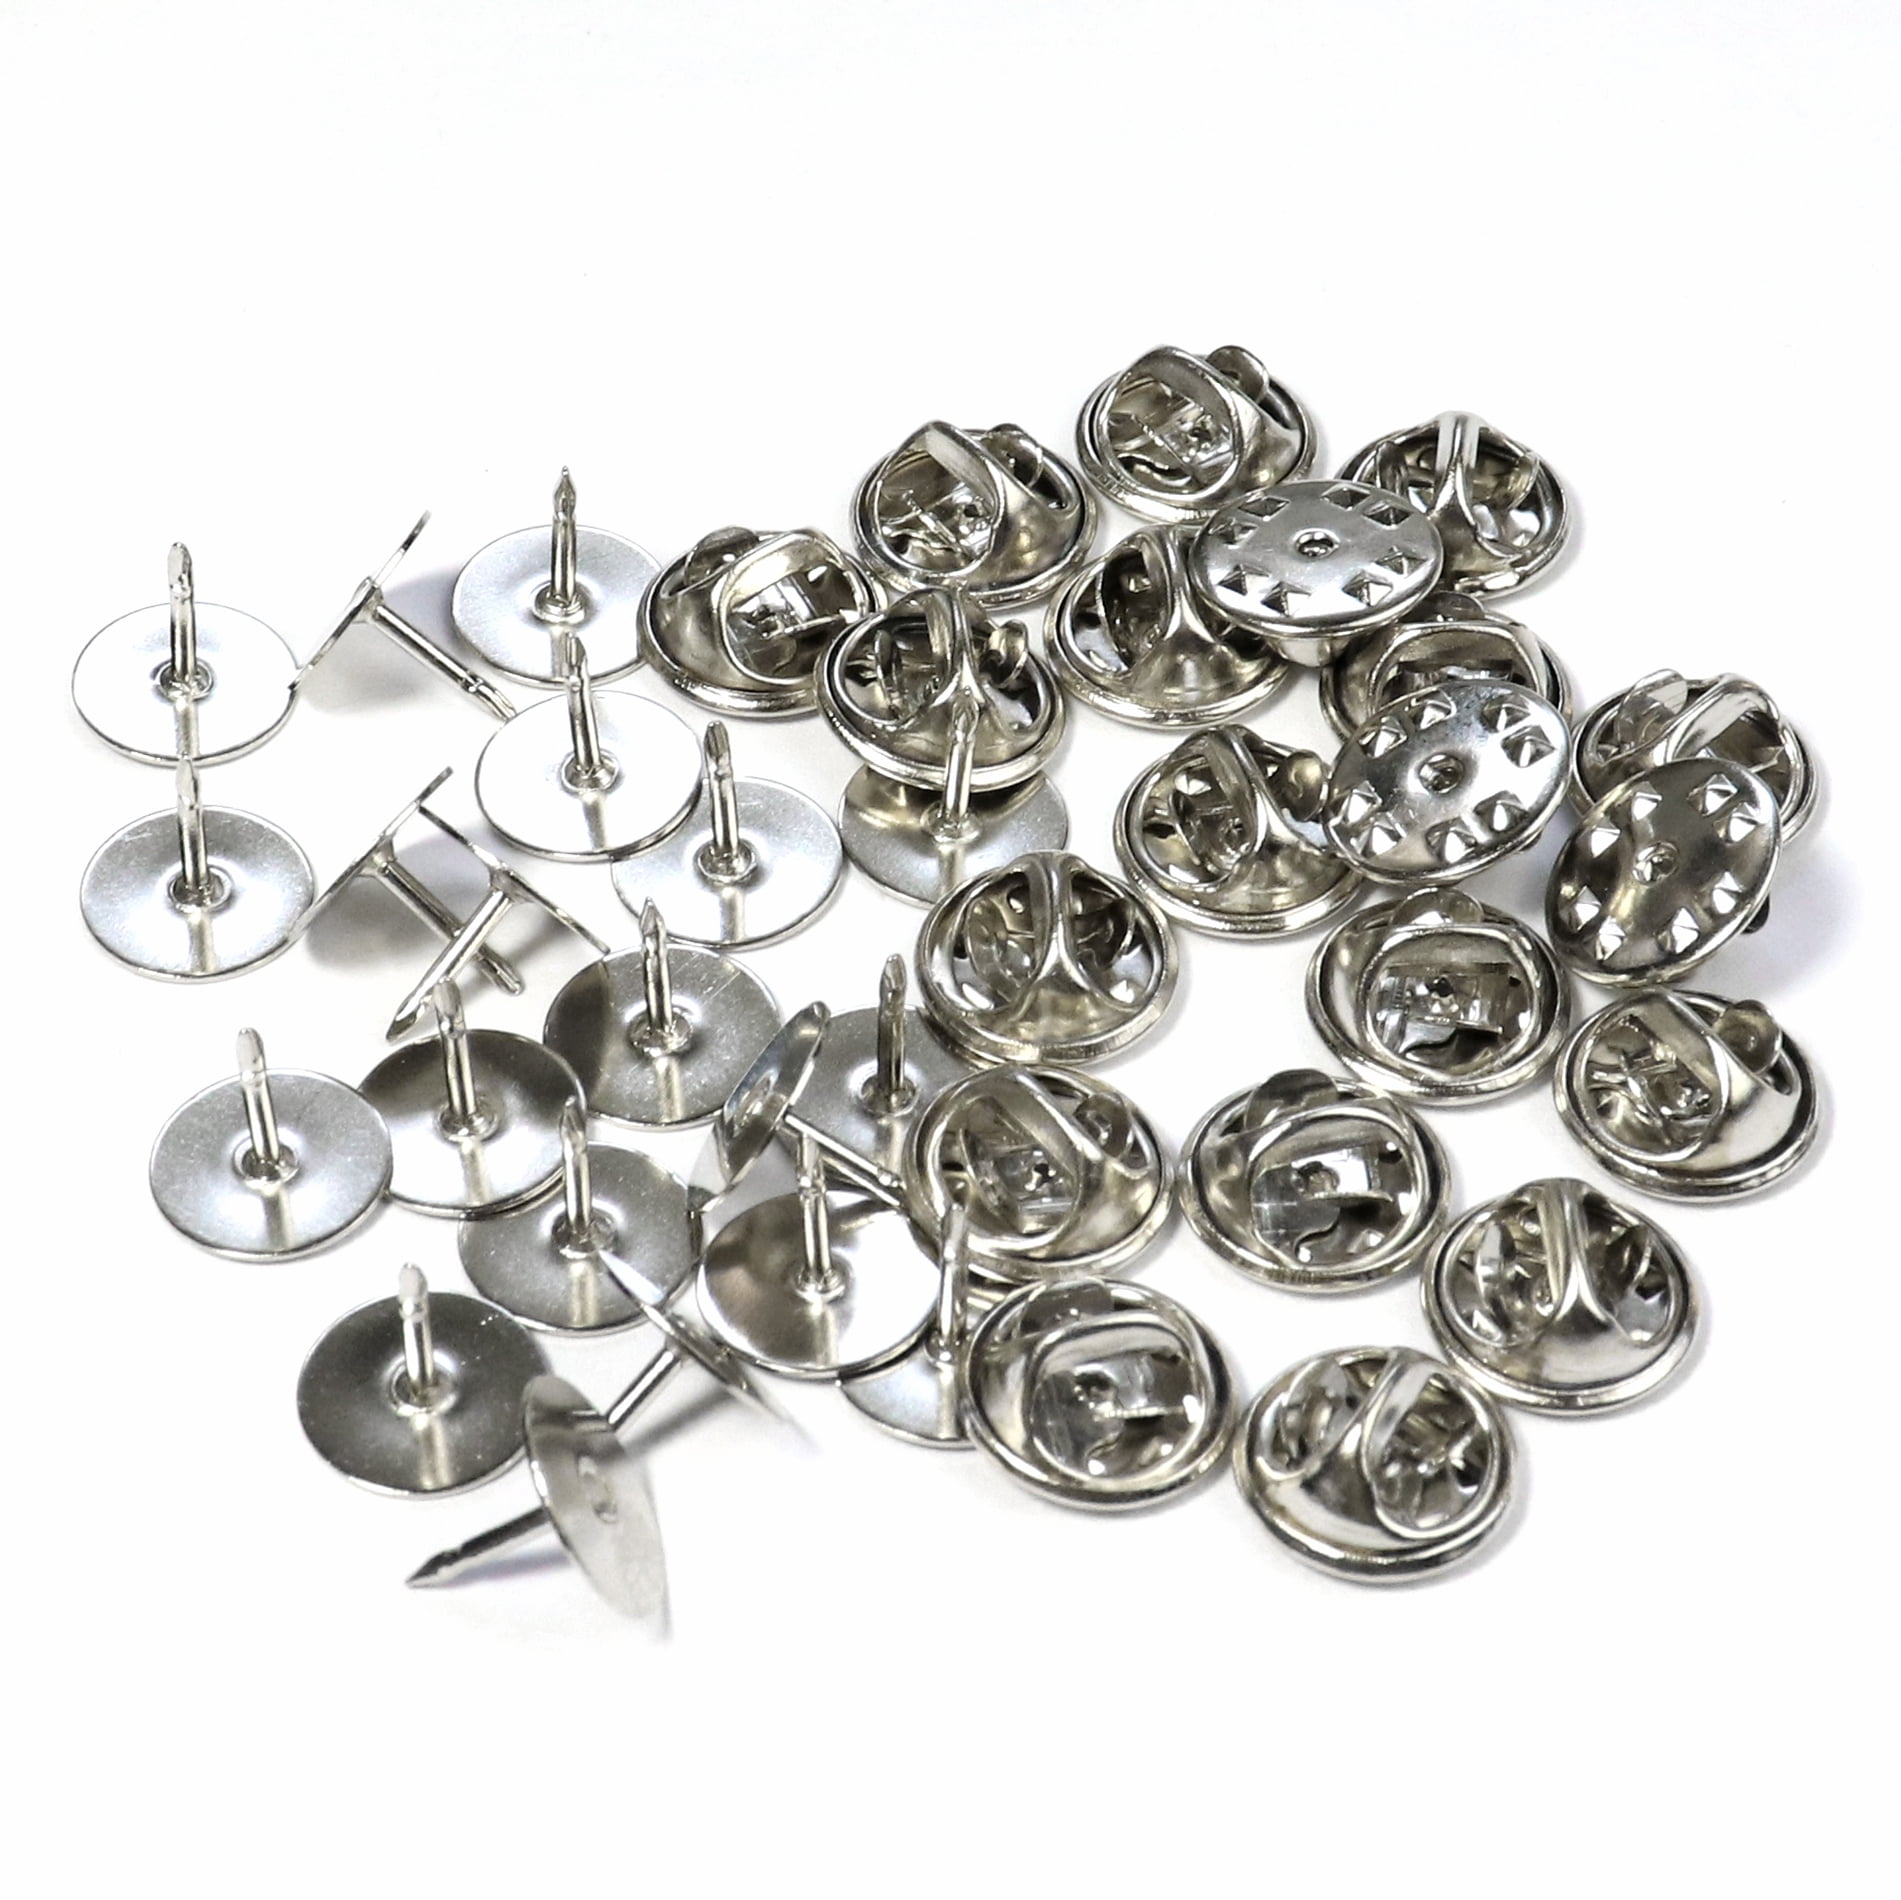 120 Pairs Butterfly Clutch Tie Tacks Pin Back Replacement with 8mm Length Blank Pins for Craft Making (Silver)